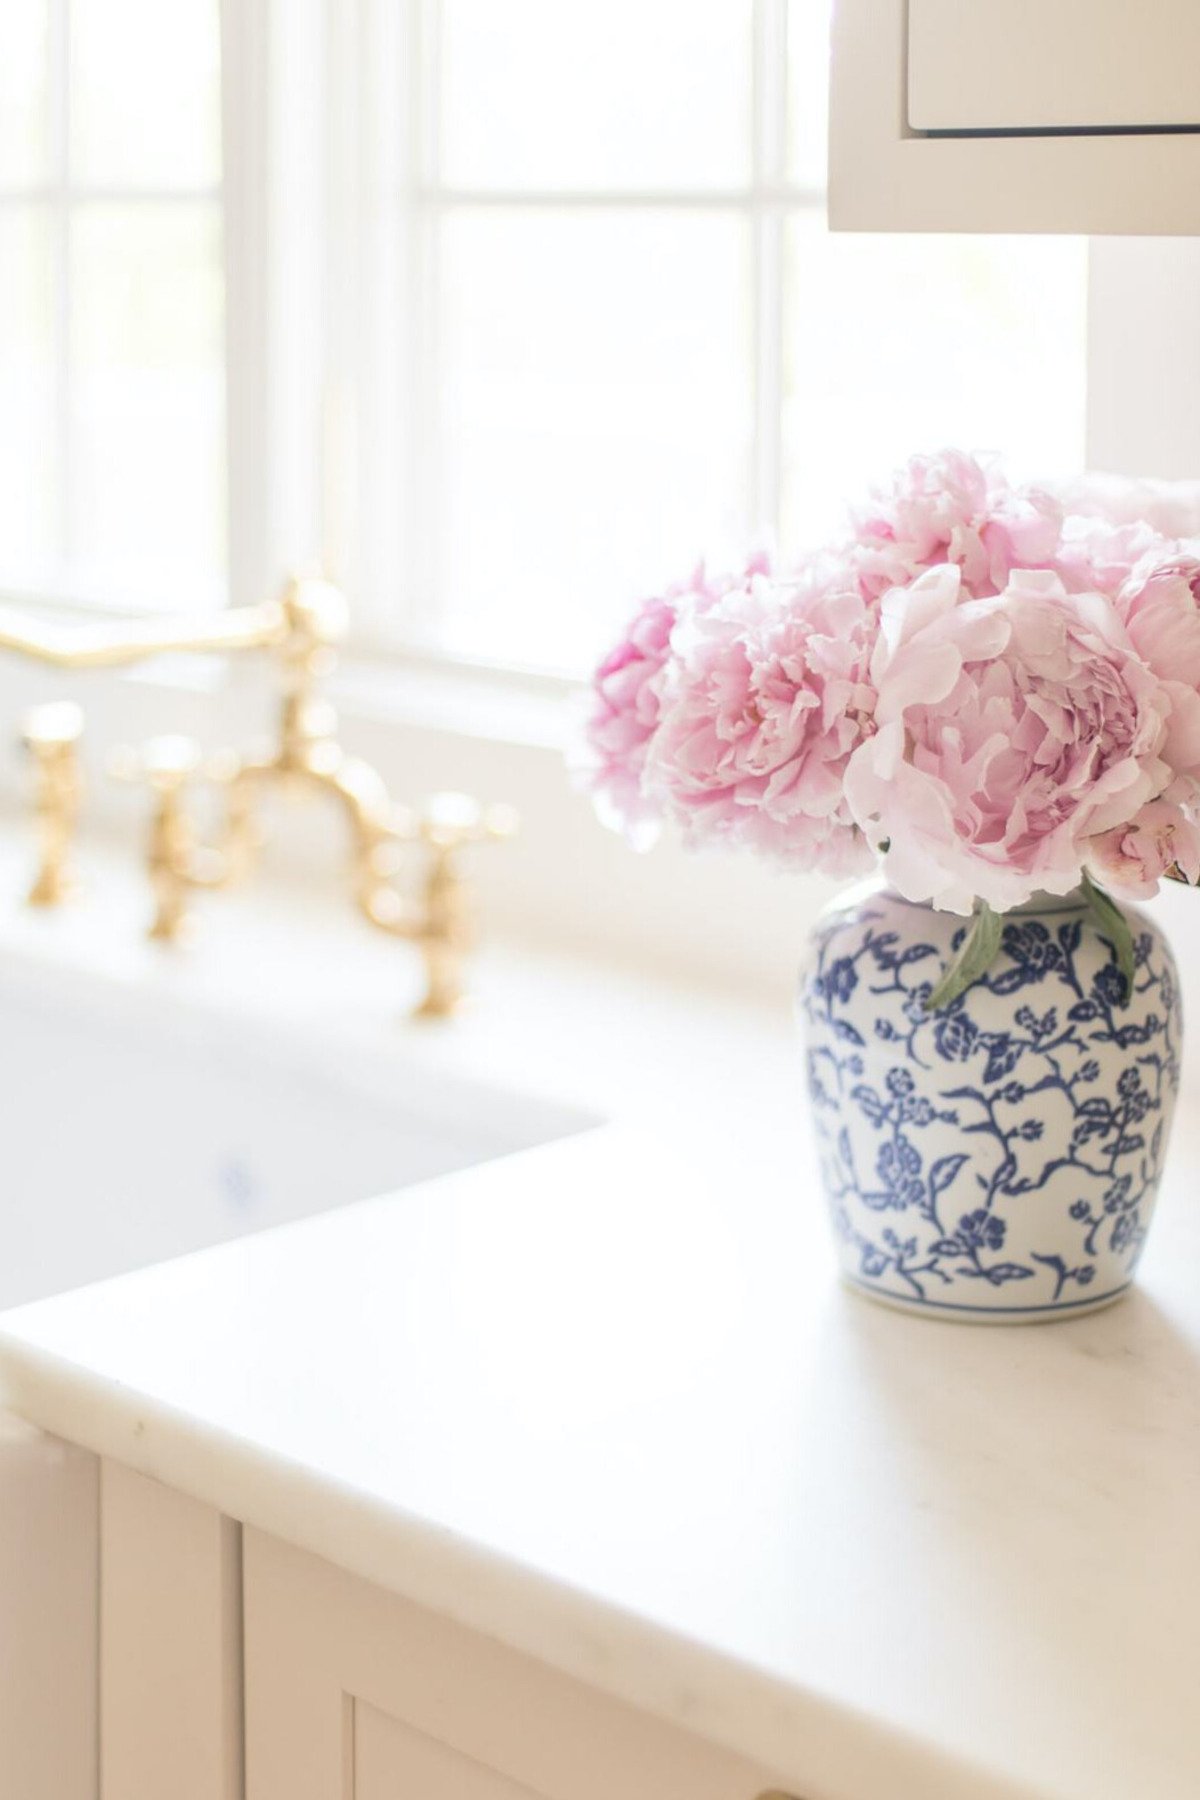 Pink and white peonies in a blue and white vase on a kitchen counter.